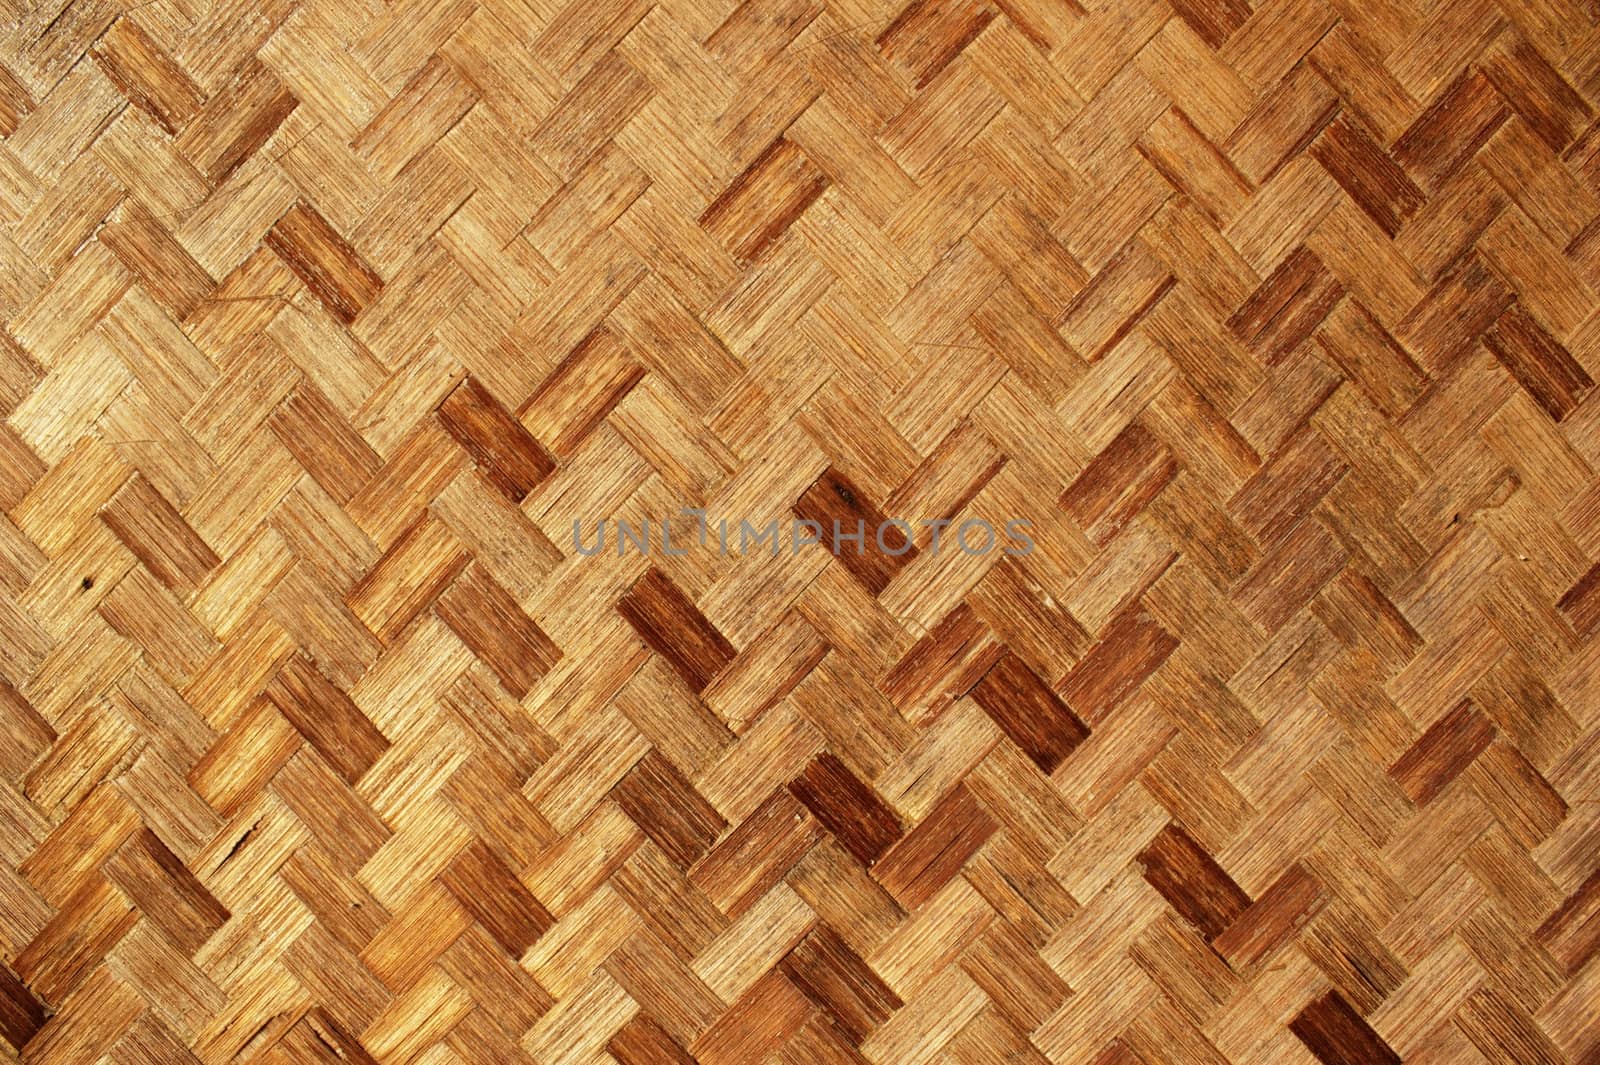 Asian style mat knit with thin bamboo strips, suitable for ethnic background texture
